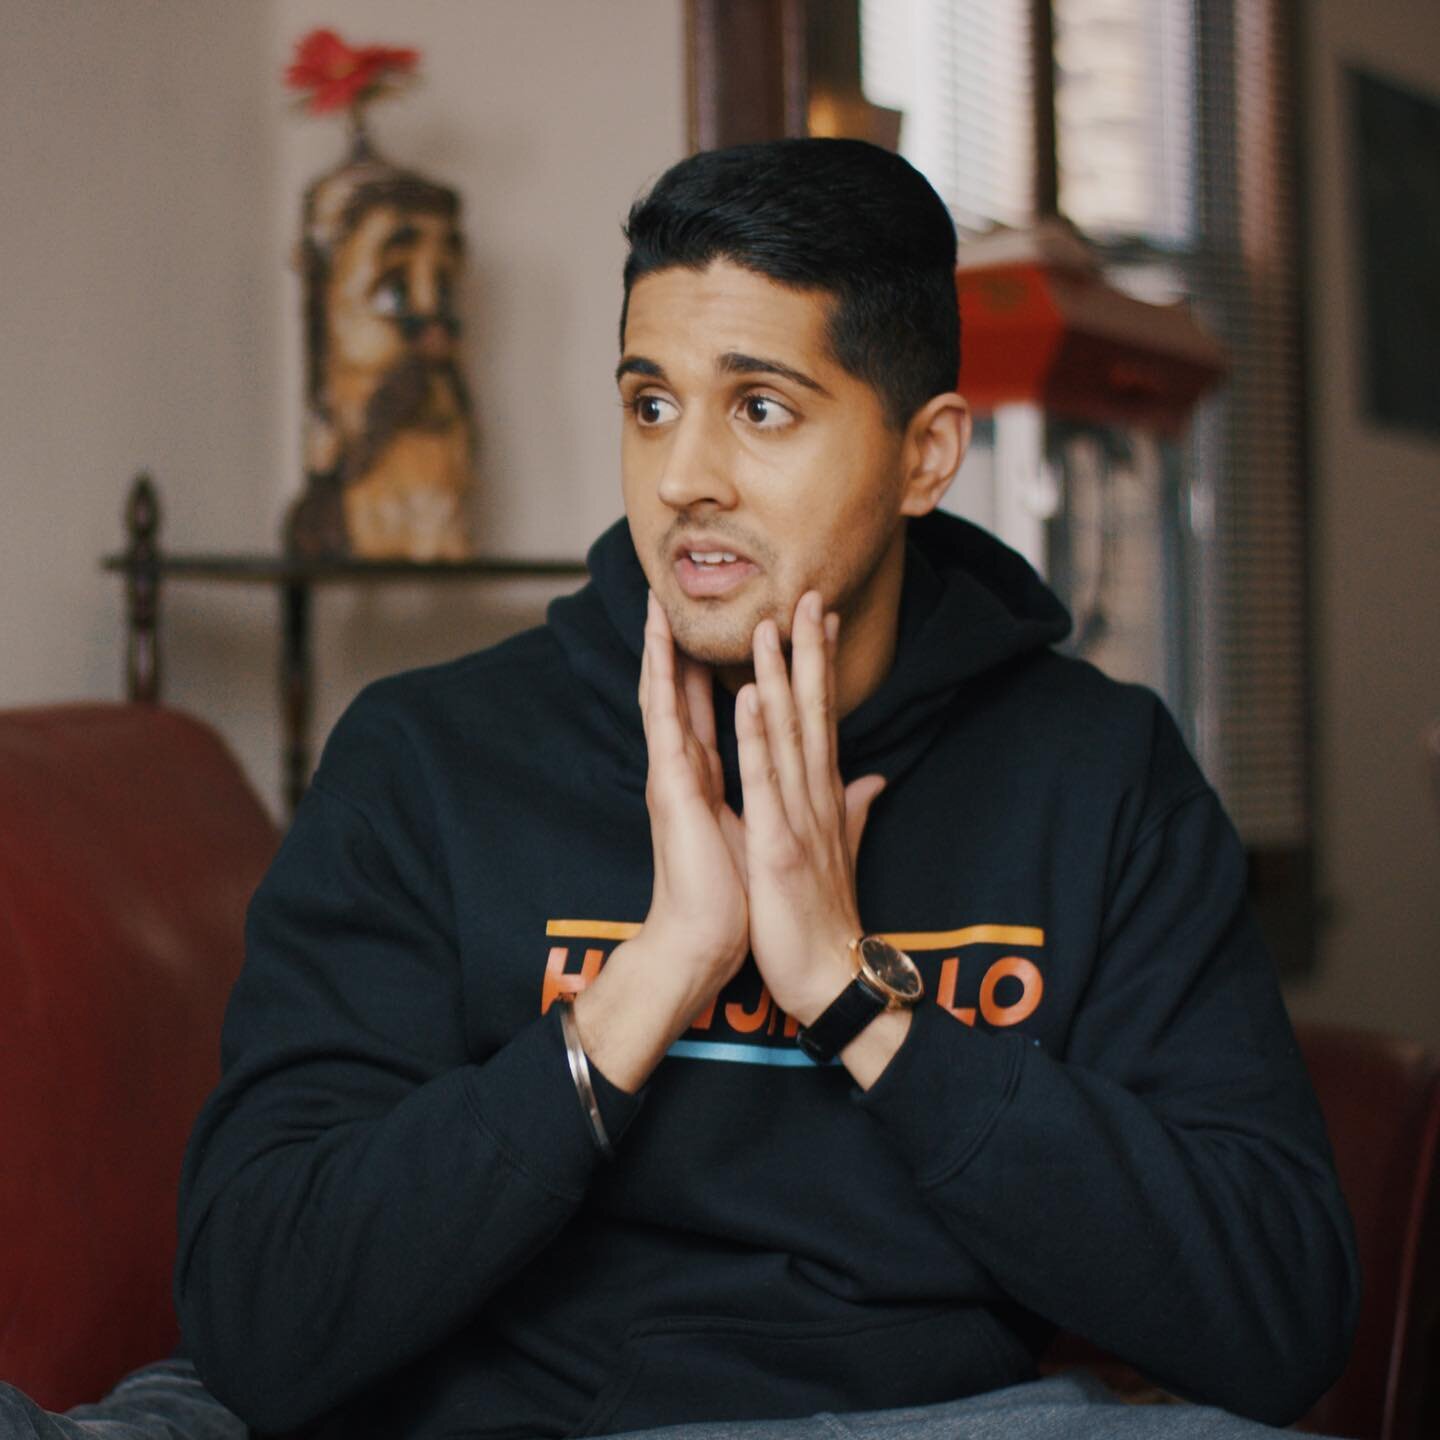 your homie Krish has 2 female friendships, 8 bomber jackets and the emotional dependency of a baby koala. he listens to a troubling amount of Big Sean and hopes you&rsquo;ll accept his LinkedIn request soon. Catch Krish on #codeswitched 
NOW STREAMIN